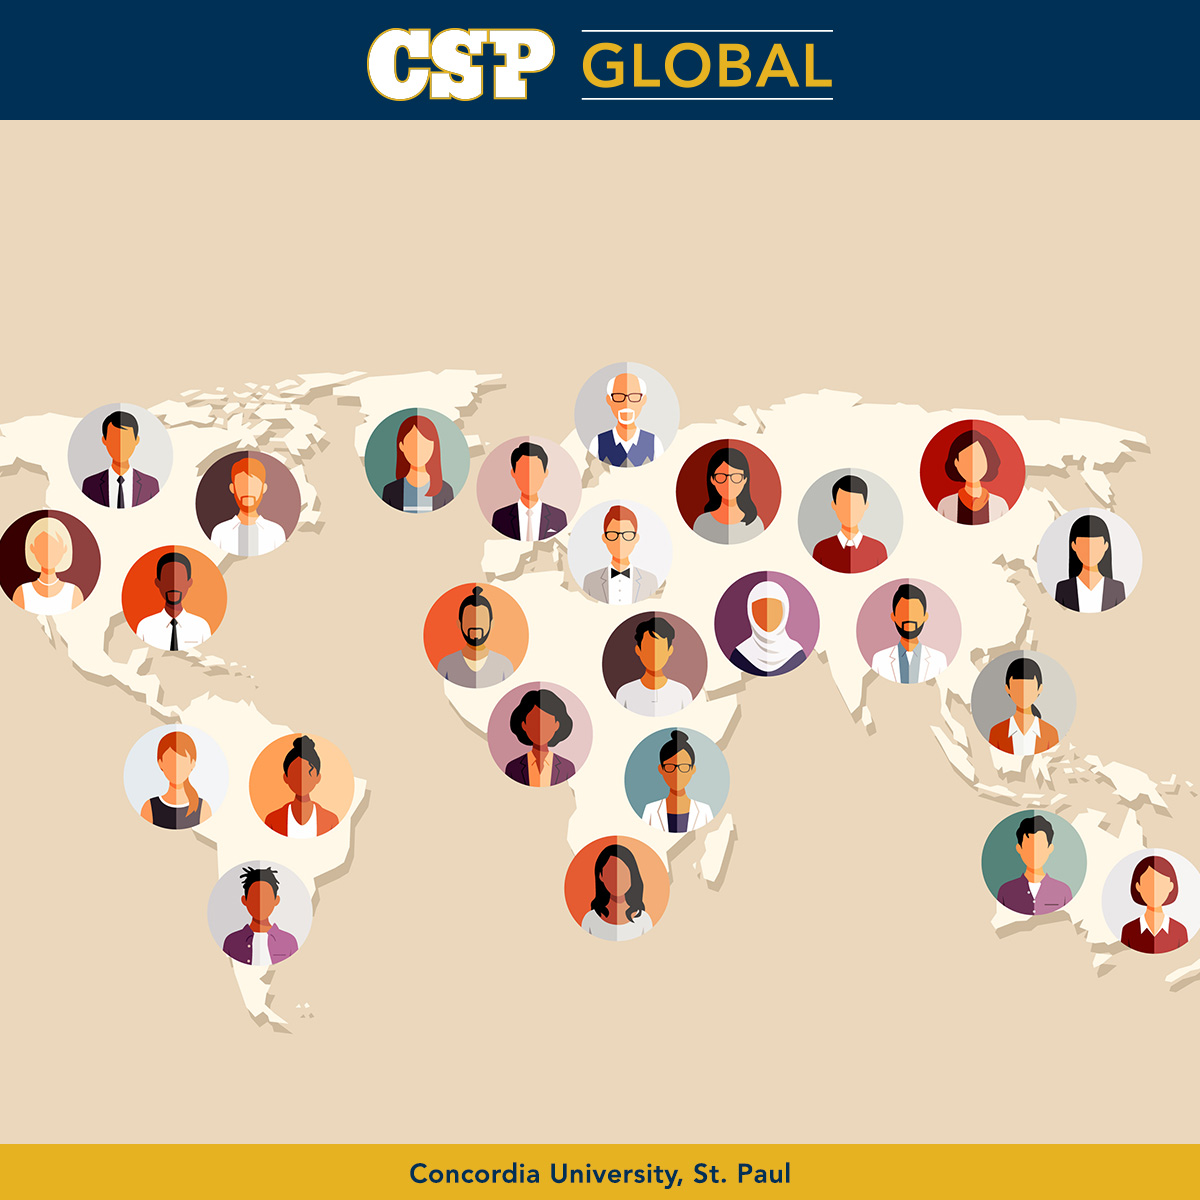 Did you know that CSP online graduates span across 34 countries? Learn from a diverse community of learners with students from places like India and China! #WeAreCSP ow.ly/ifcQ50R1sTA